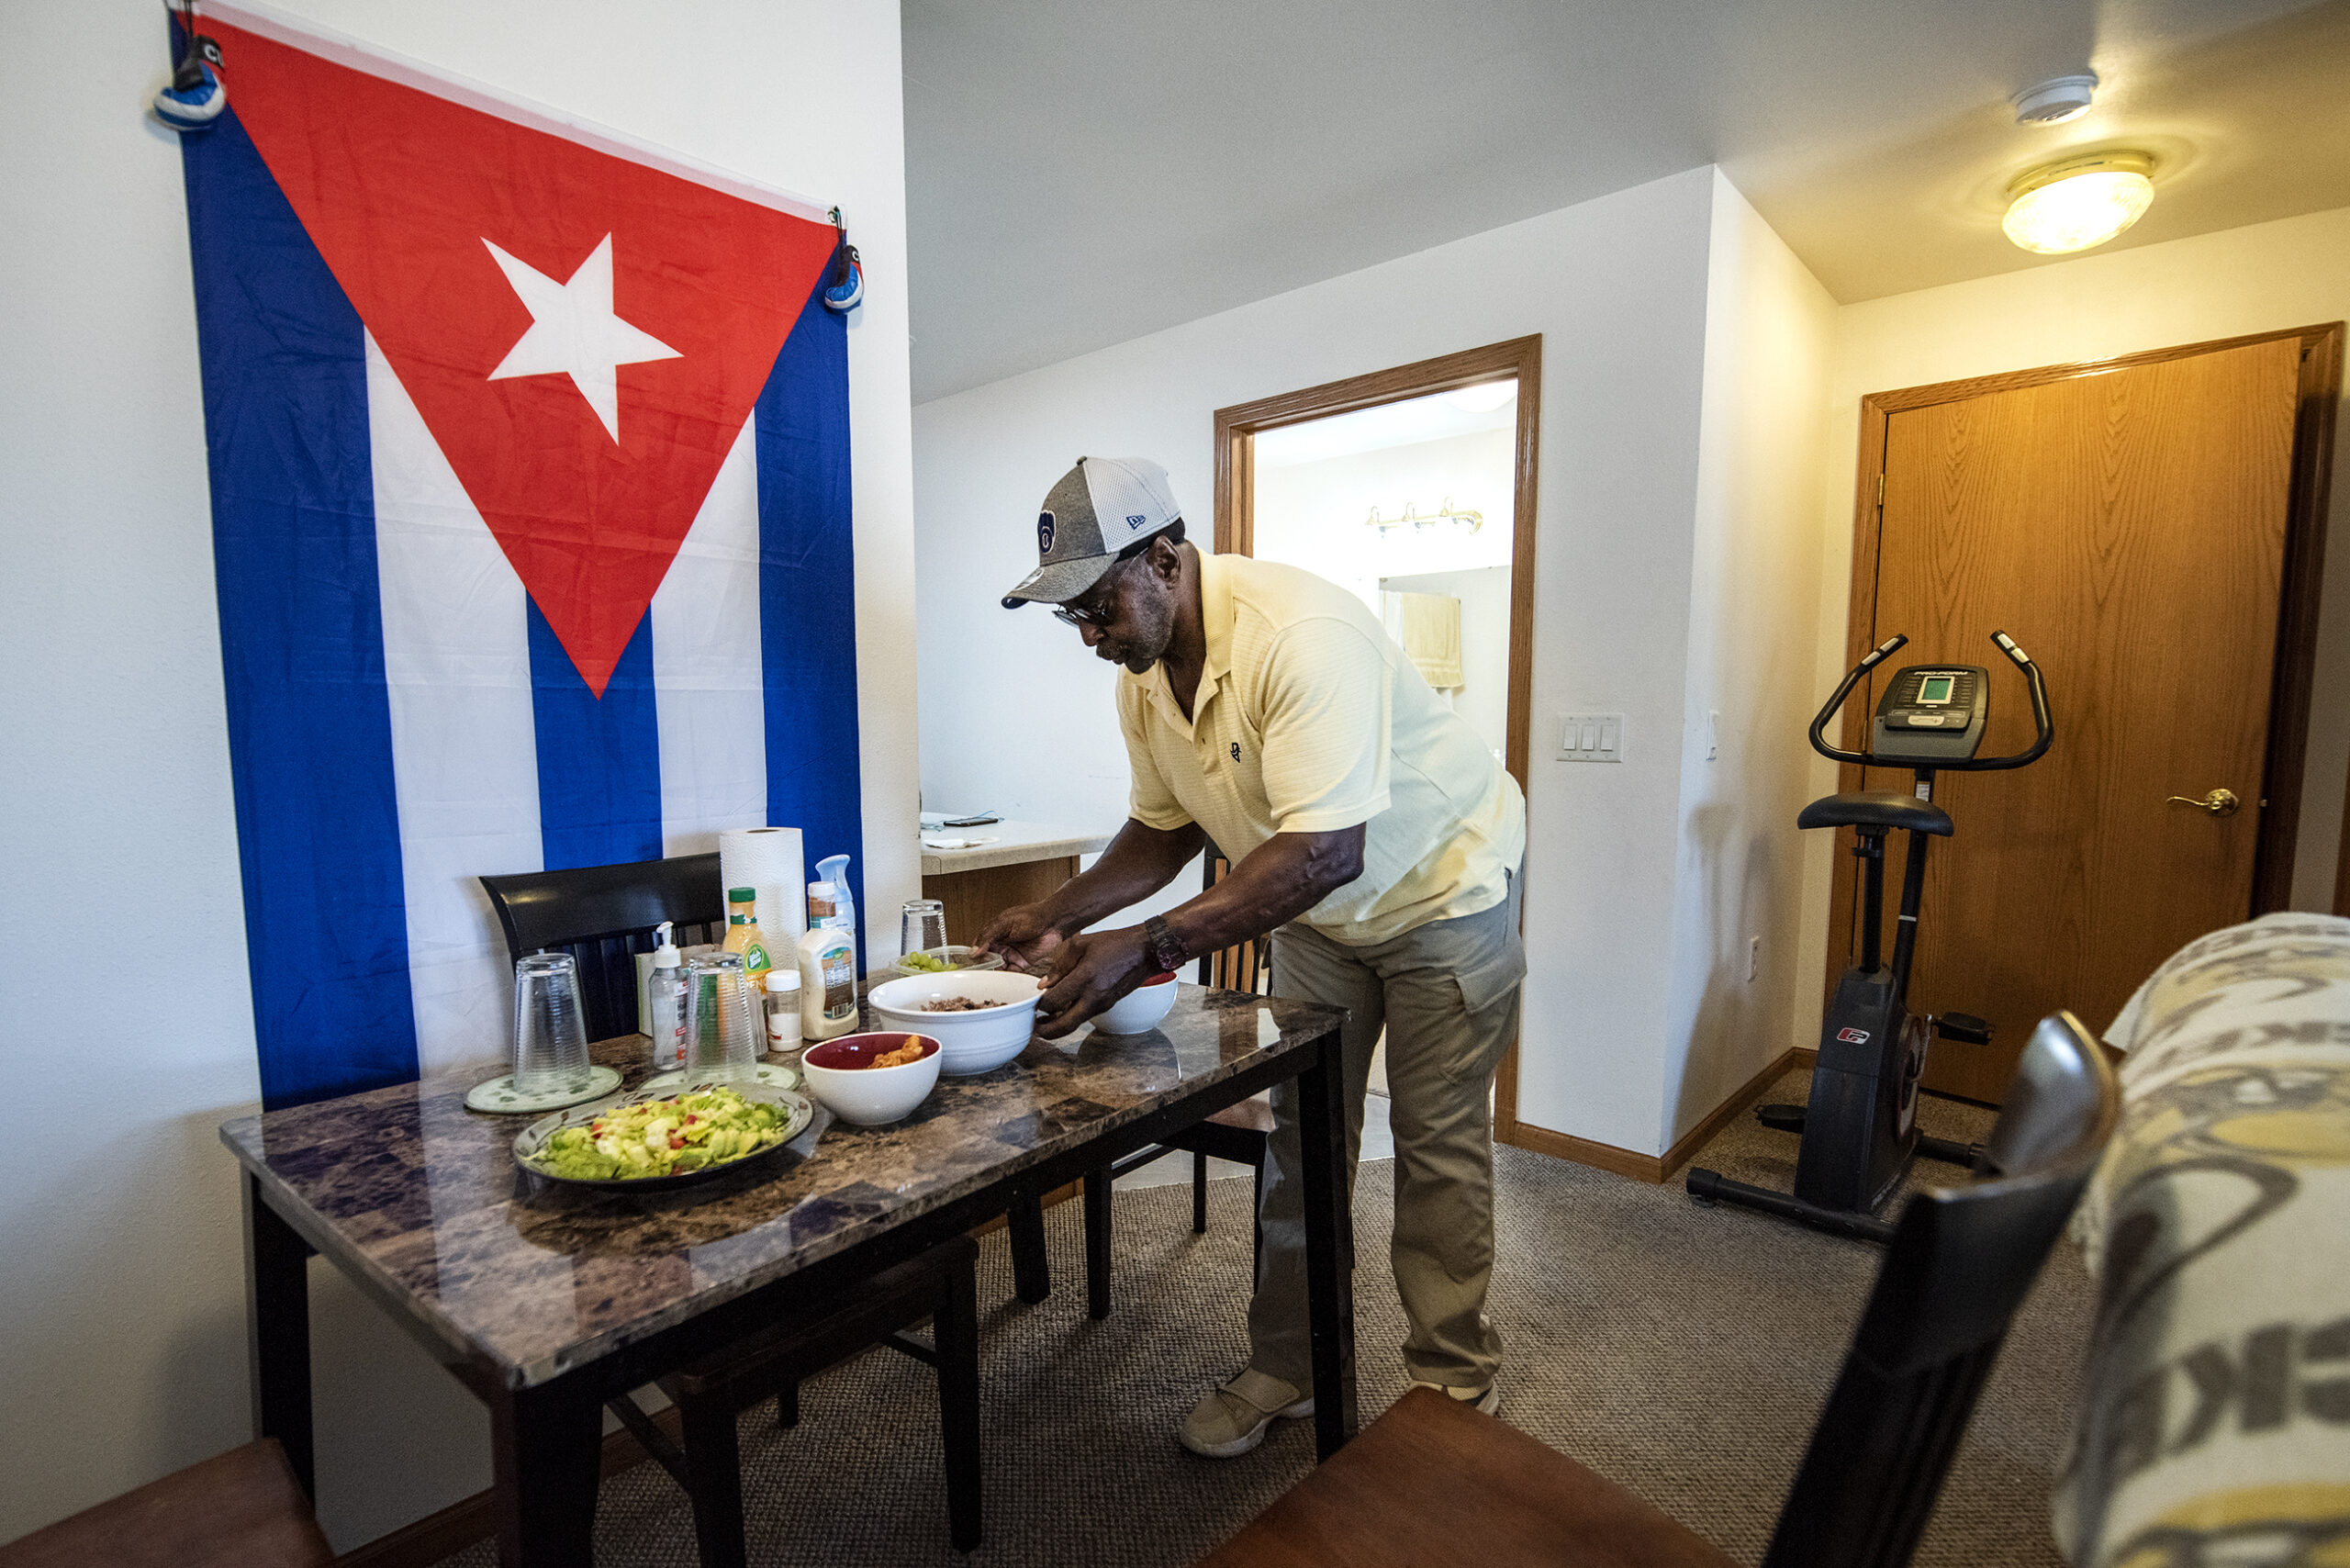 Osvaldo Durruthy prepares congri on his dining table. A large Cuban flag is hung over the table